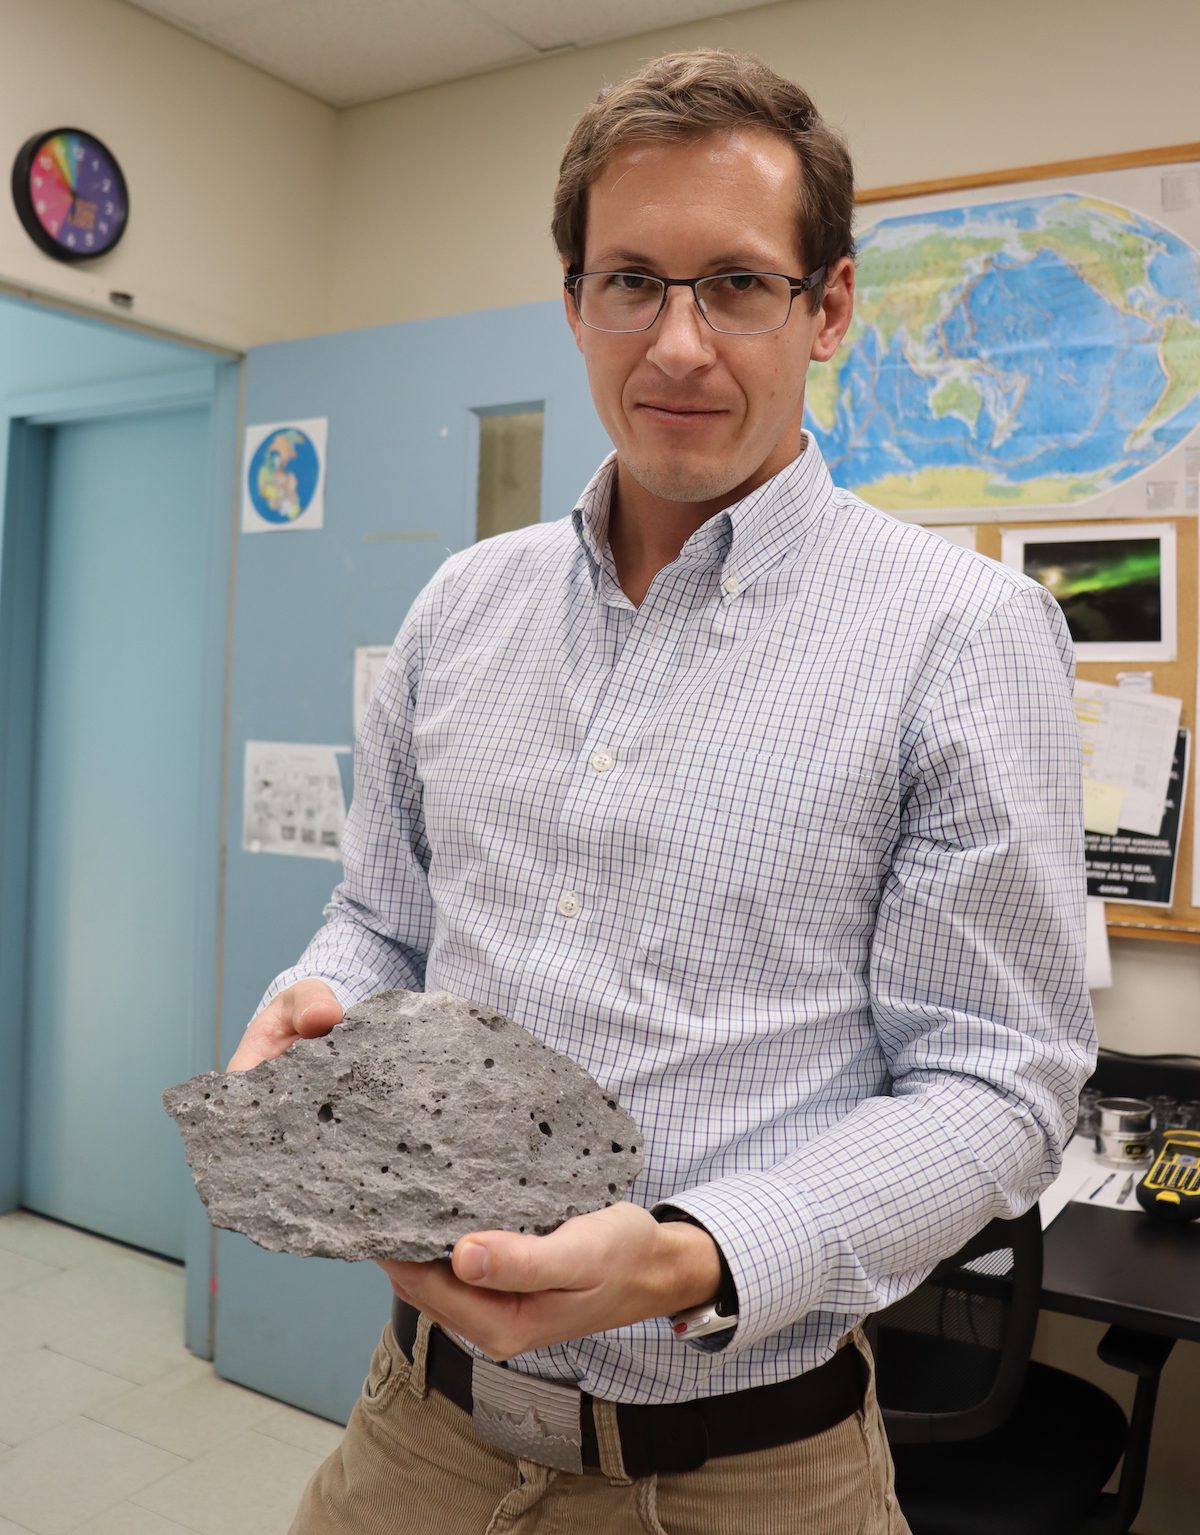 Horton shows a lava collected from Fagradalsfjall volcano in his lab at WHOI. (Photo by Elise Hugus, © Woods Hole Oceanographic Institution)